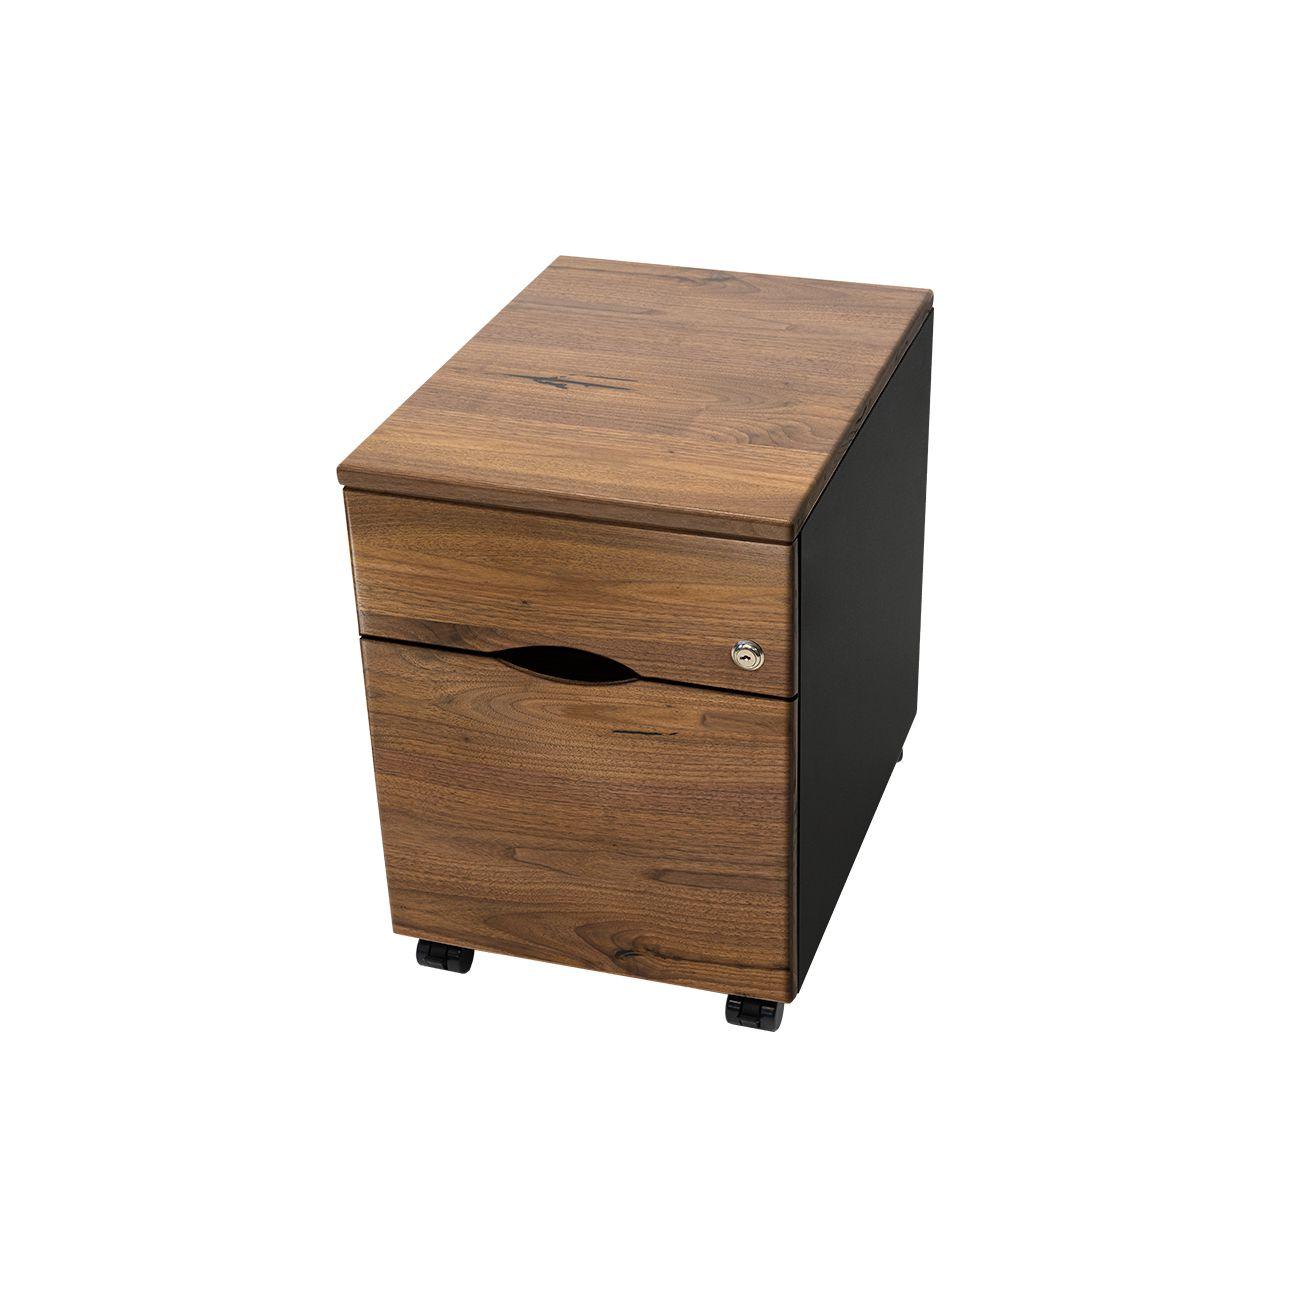 Mobile File Cabinet - Solid Wood Top & Drawer Faces - iMovR